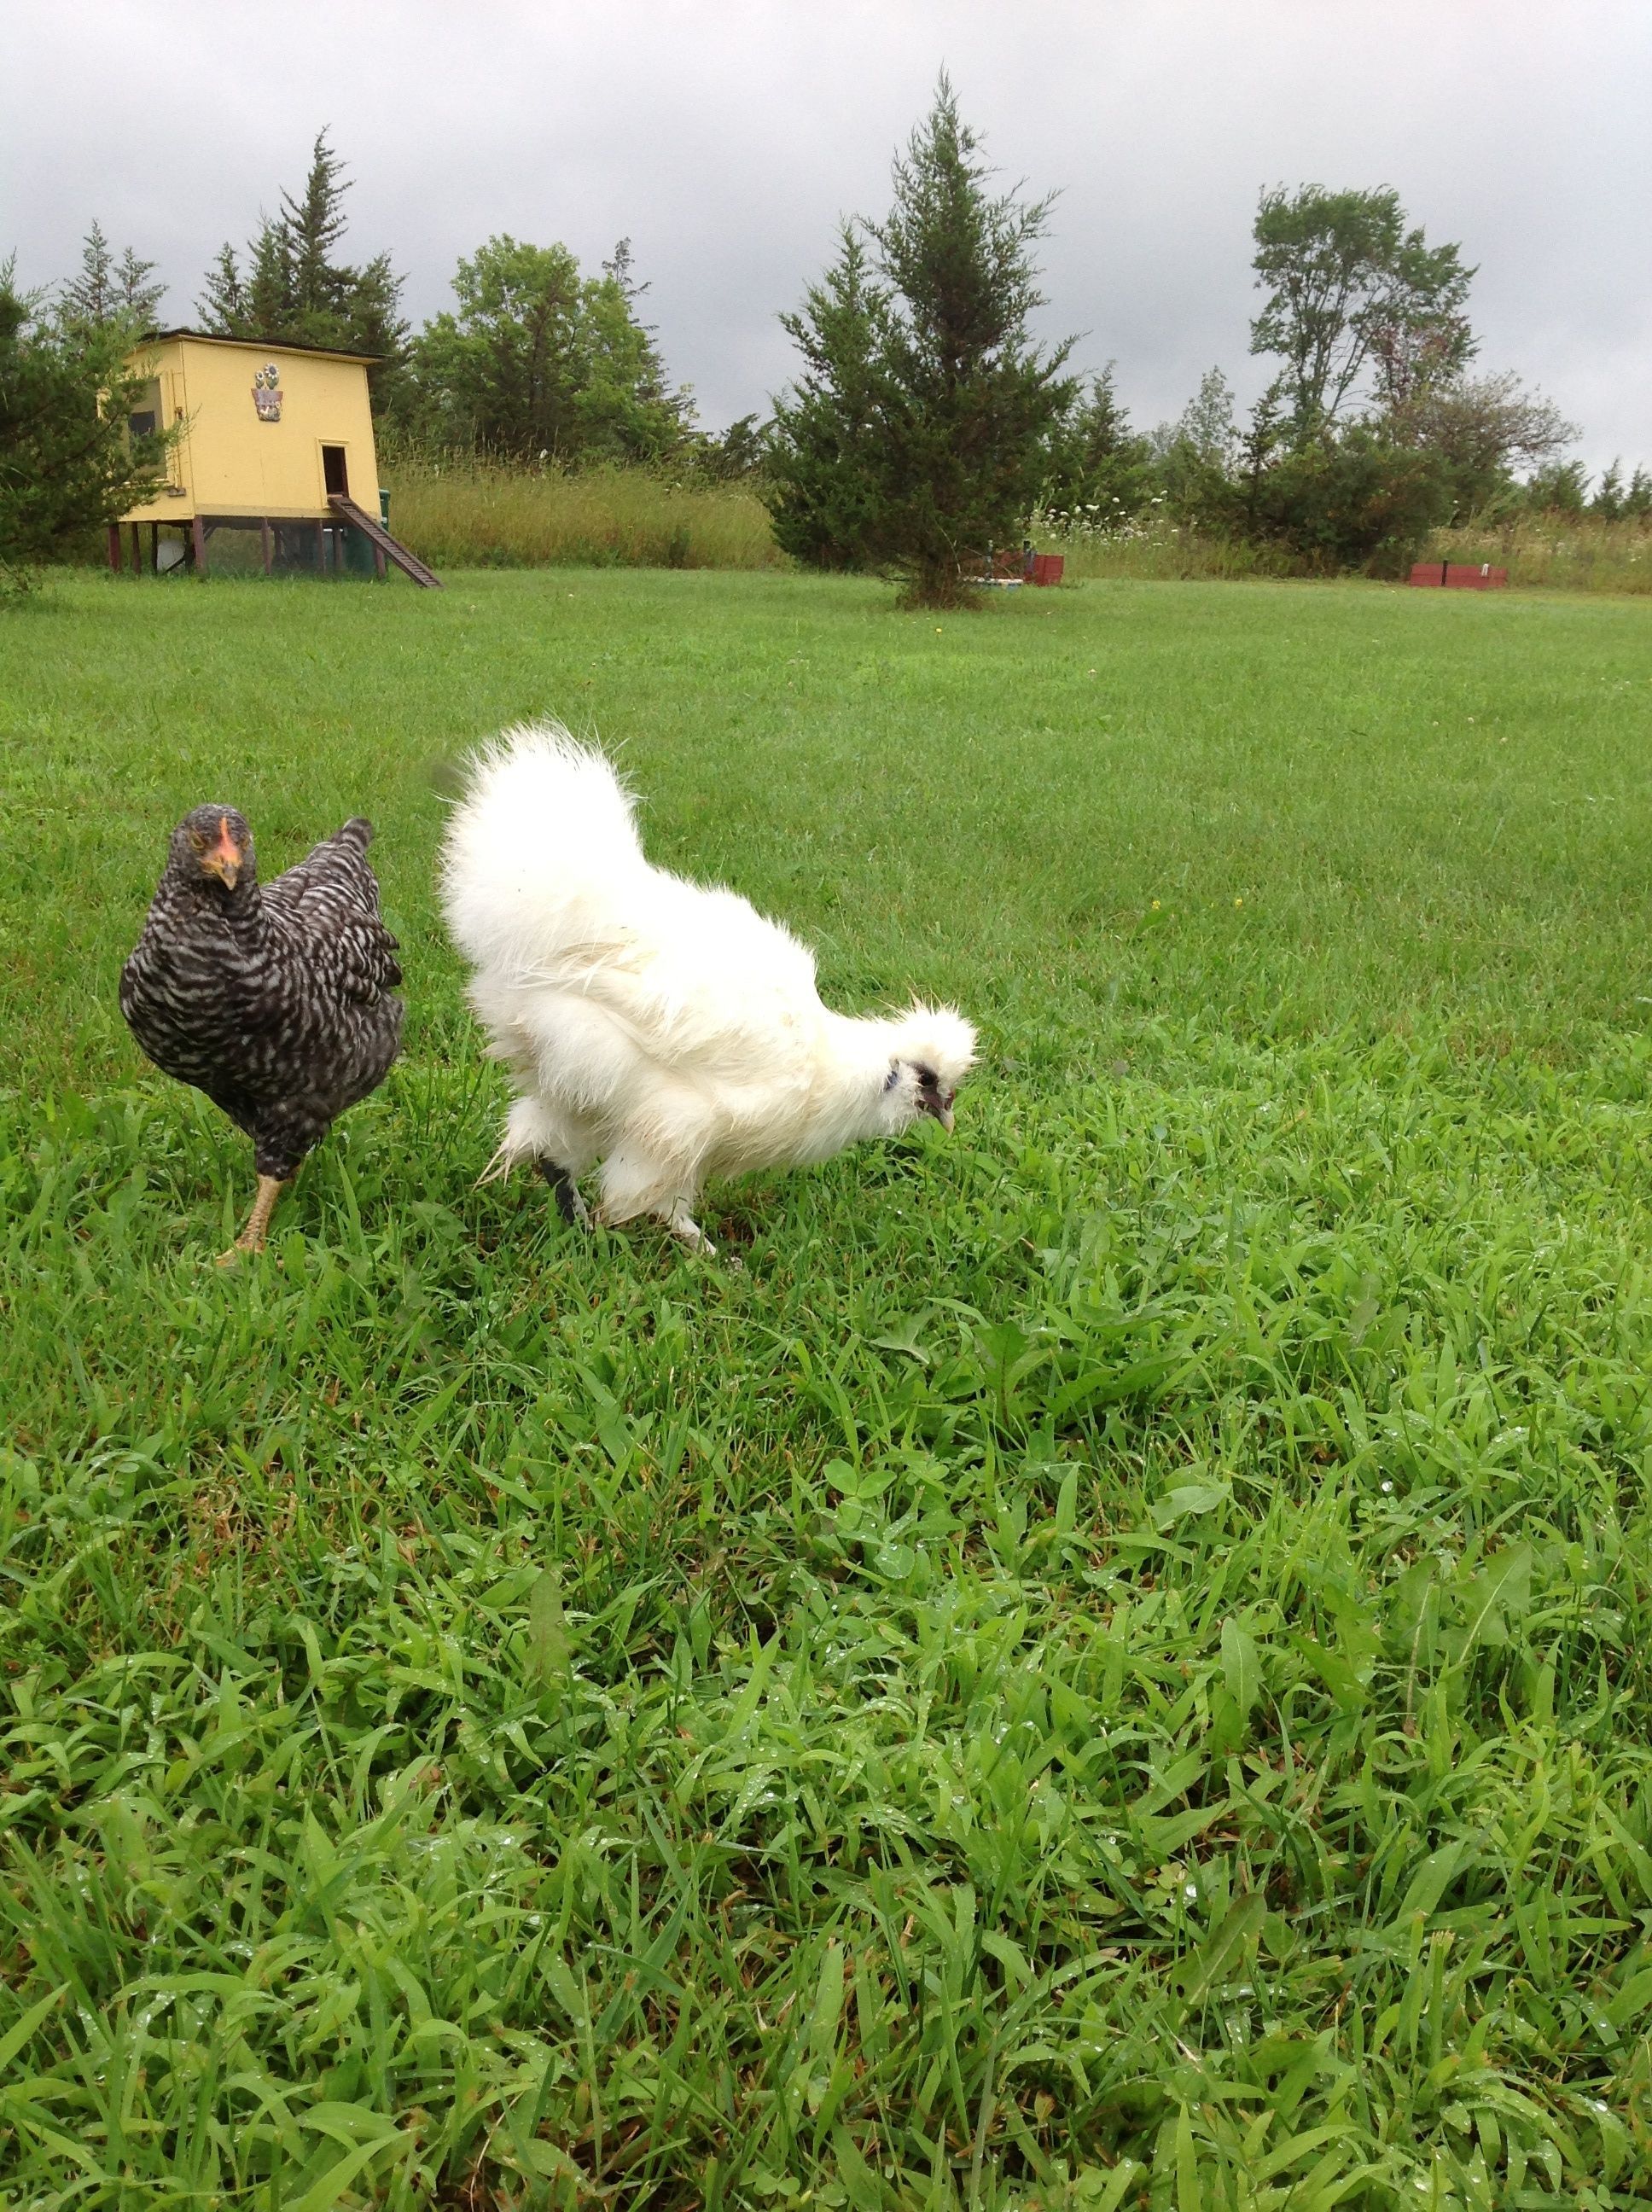 Chicken Little hen and Snowball roo - inseparable!